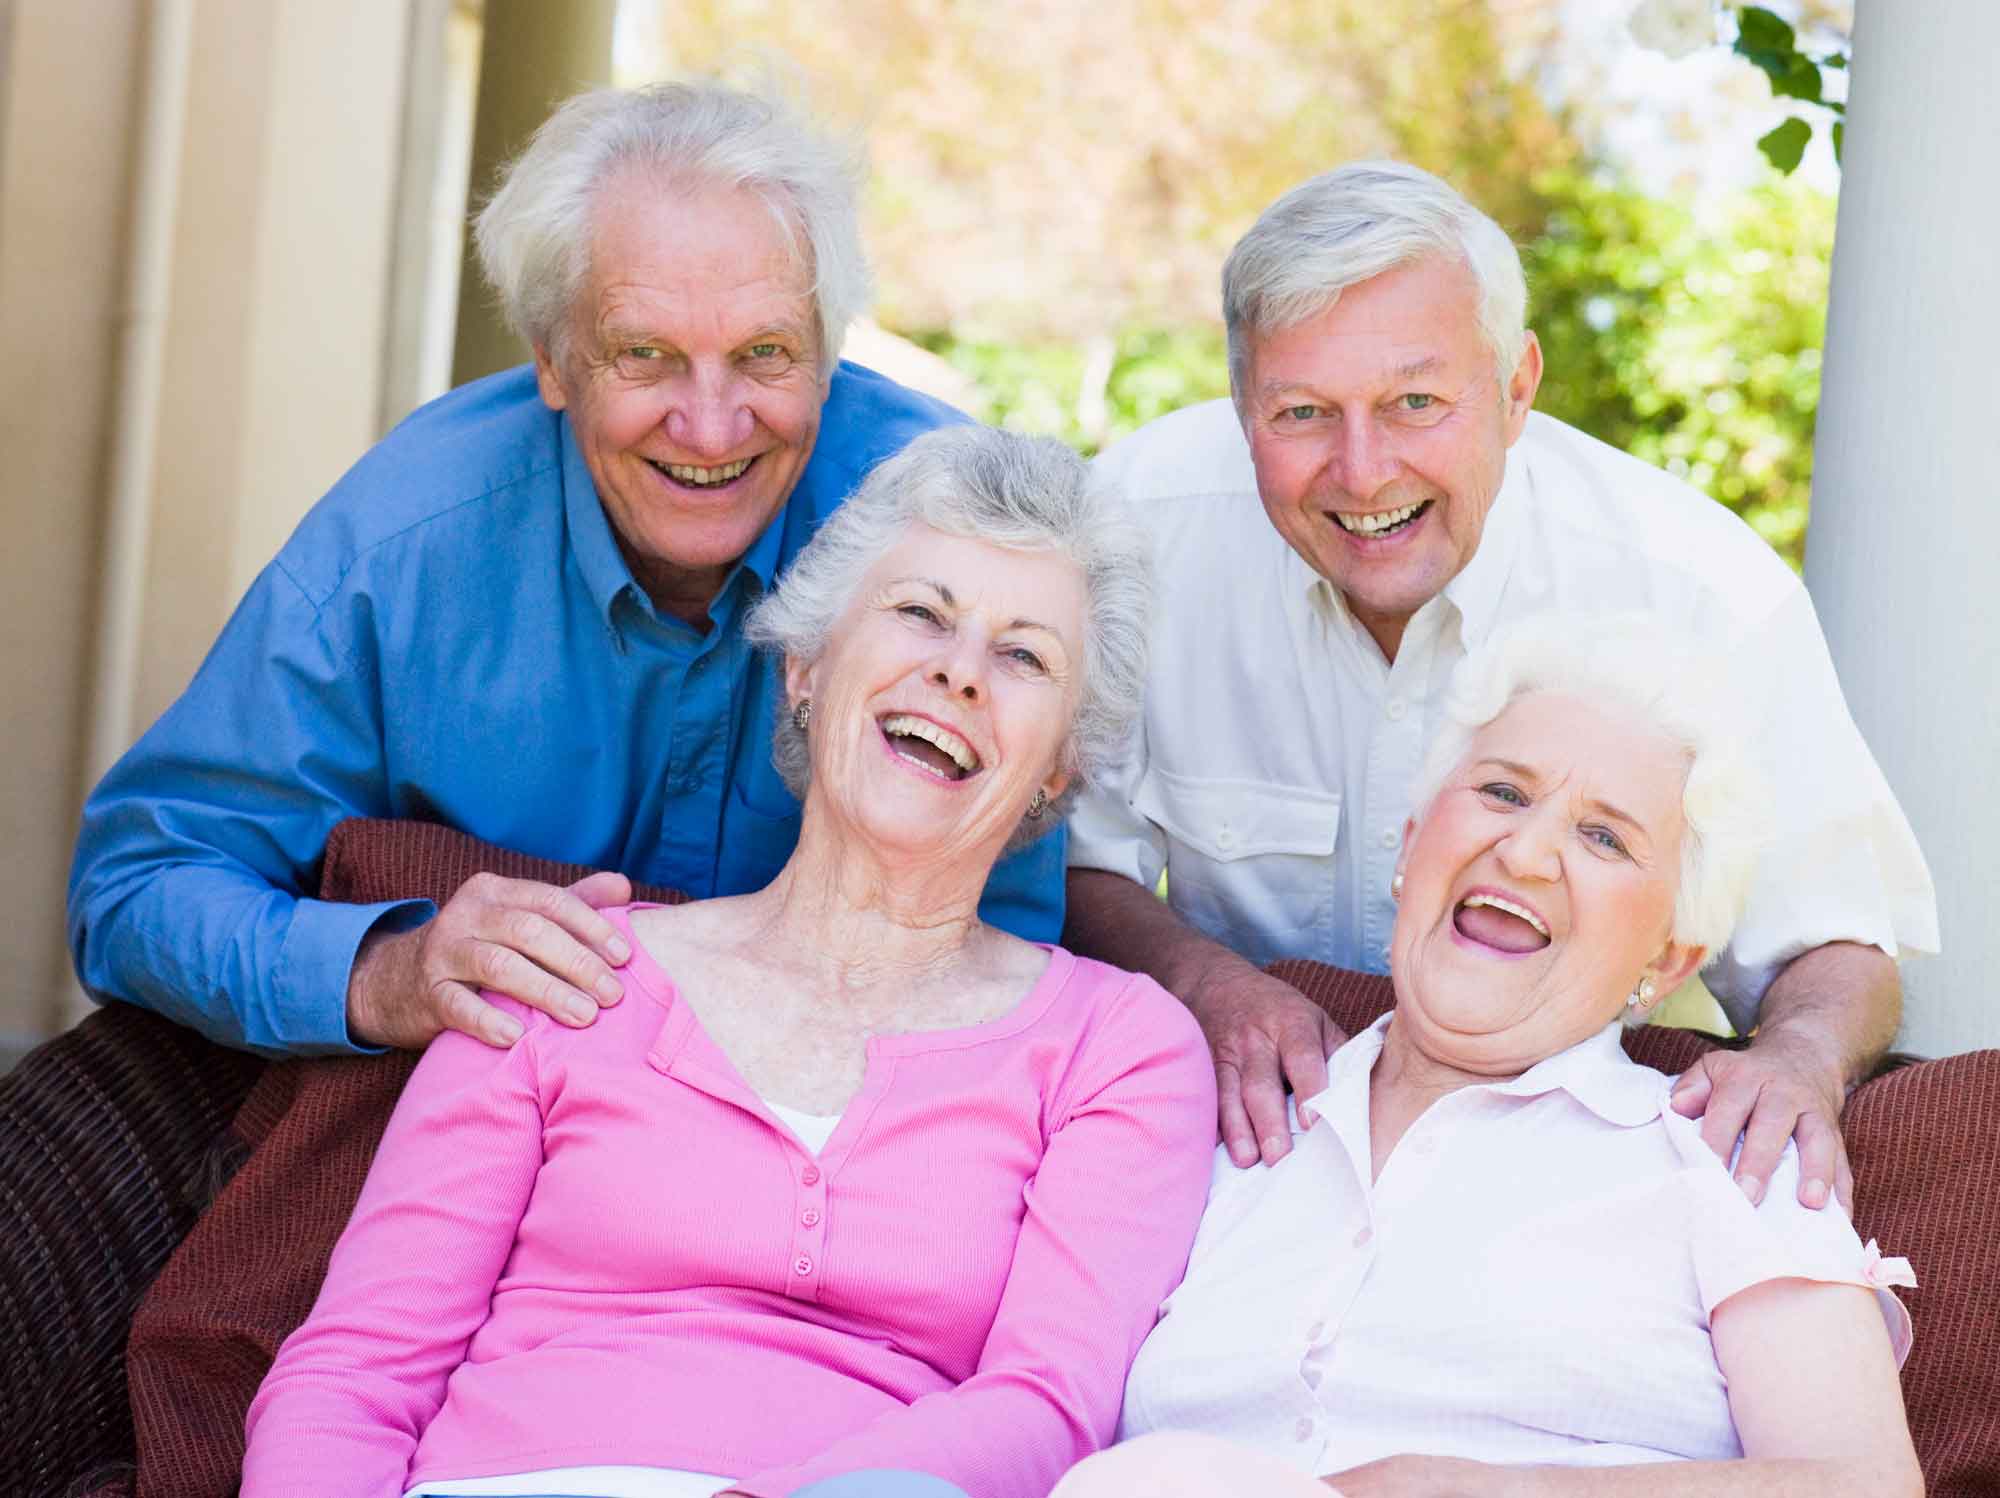 Group of senior friends relaxing together